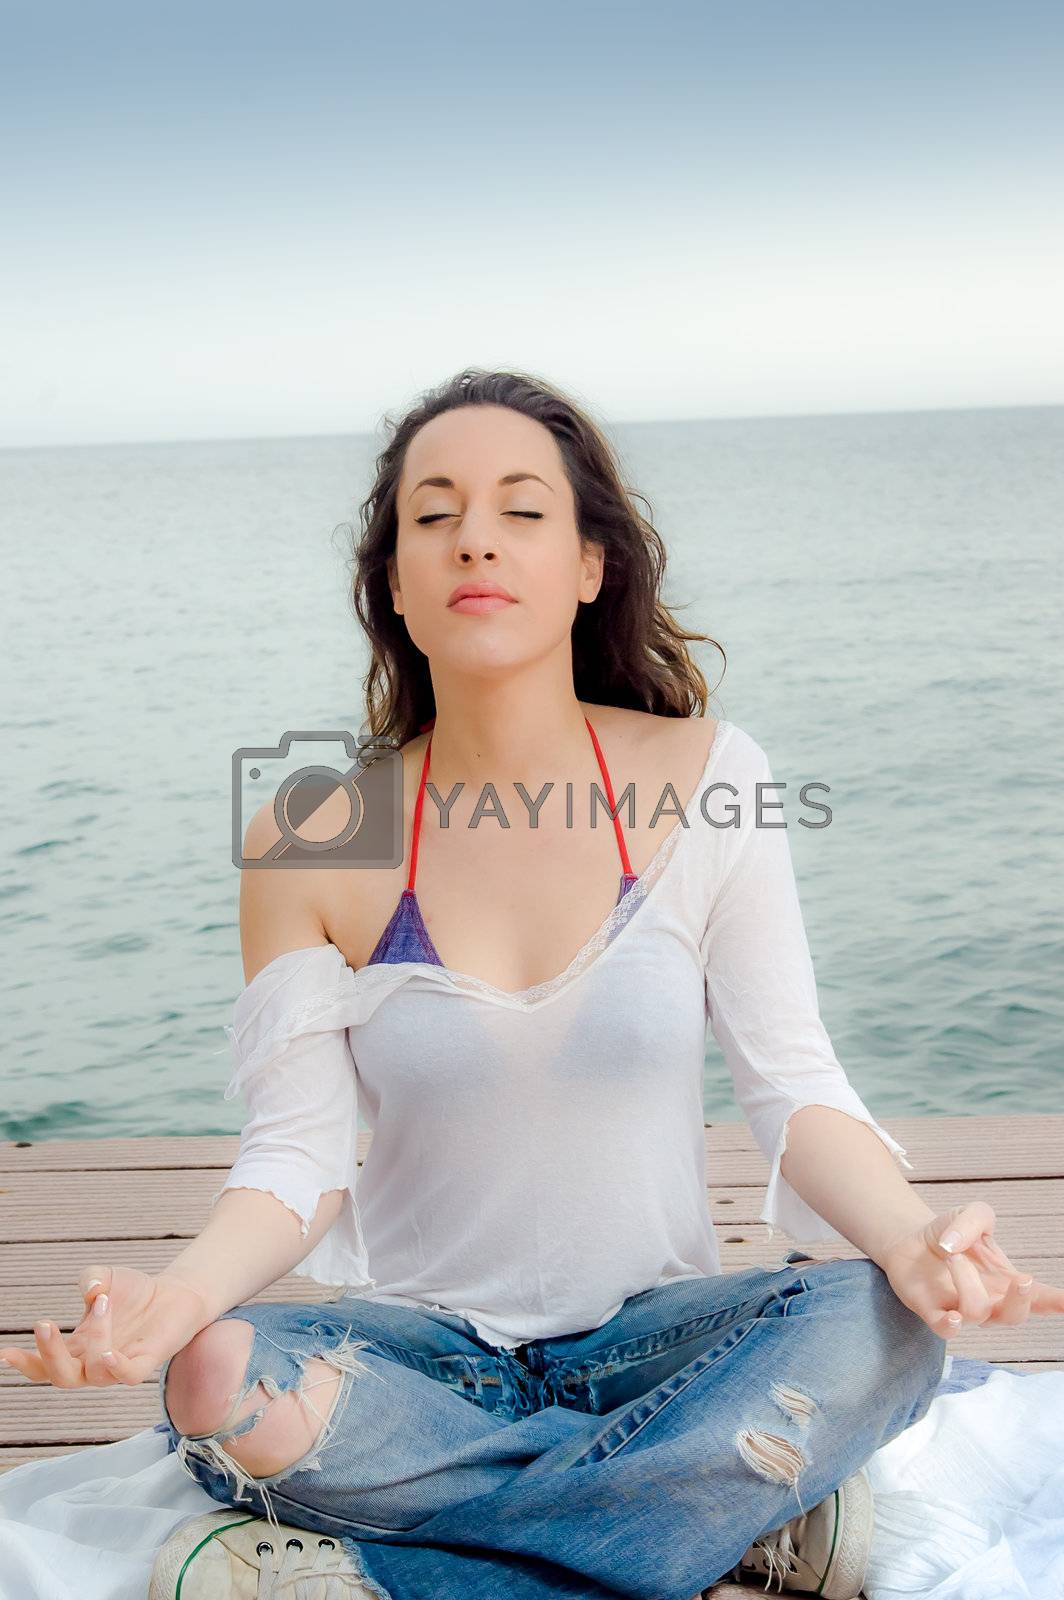 Royalty free image of Beautiful girl in meditation by saap585